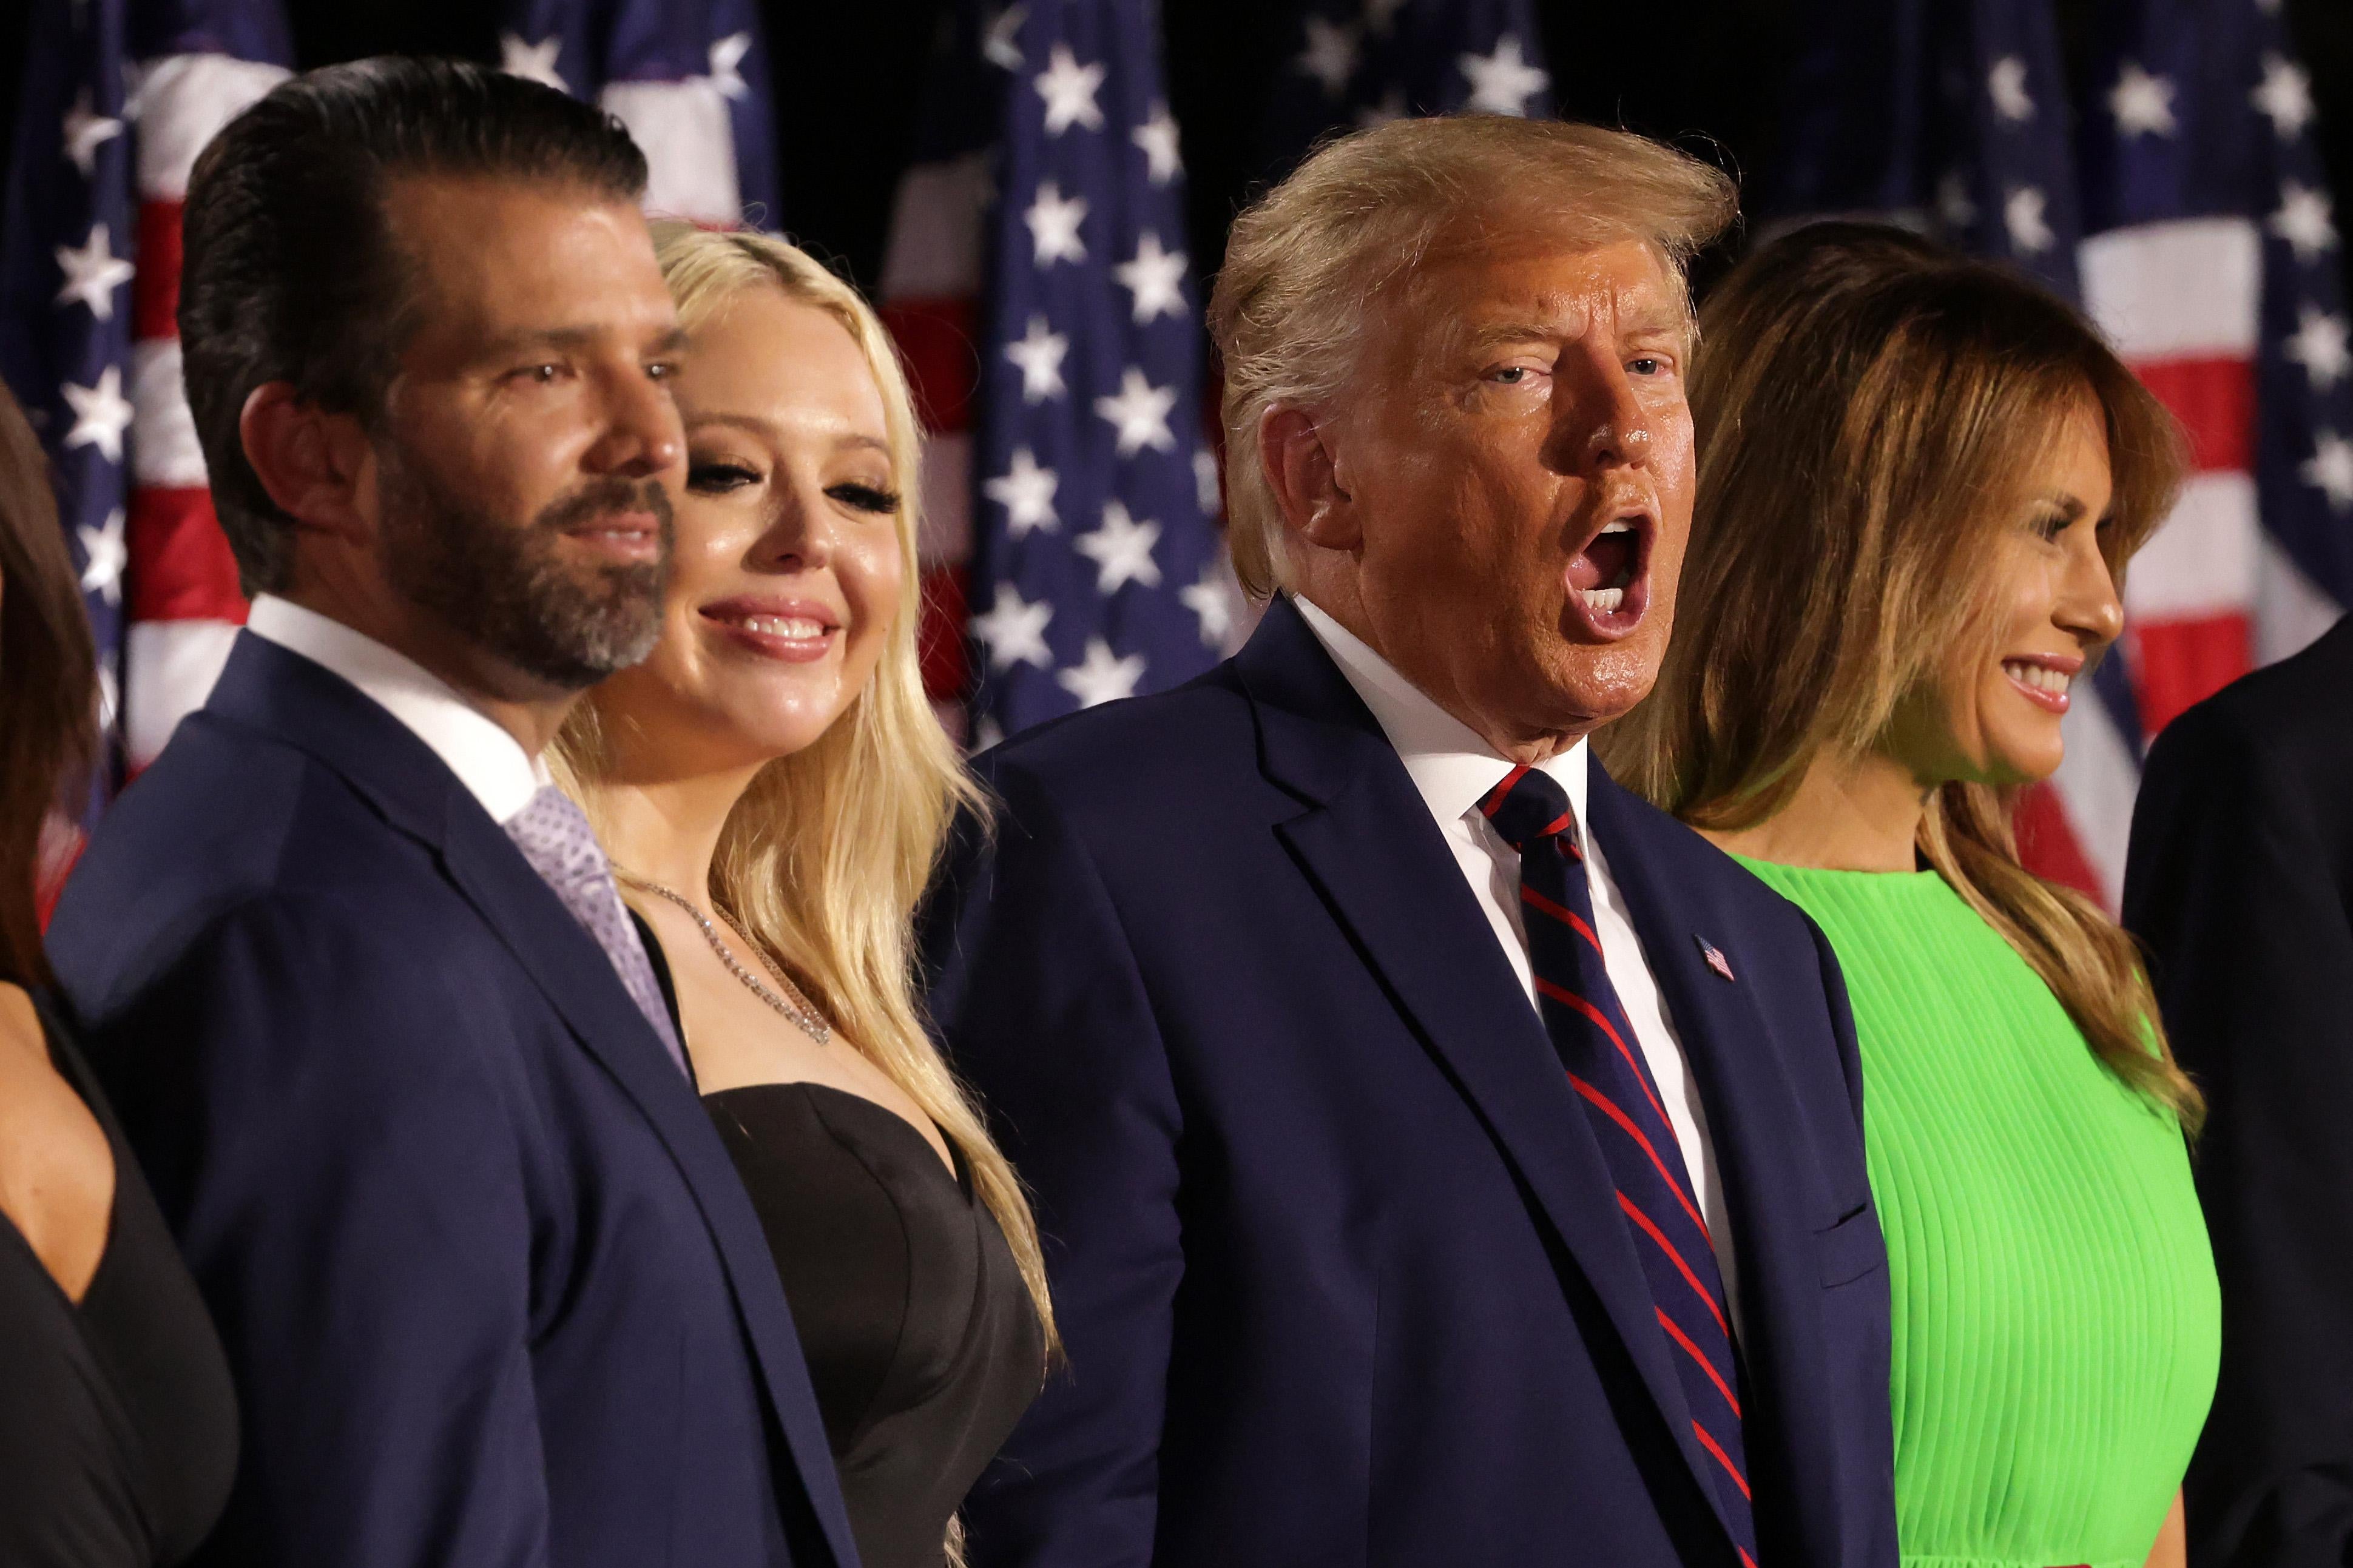 Donald Trump stands mouth open with Melania, Don, Jr., and Tiffany Trump.